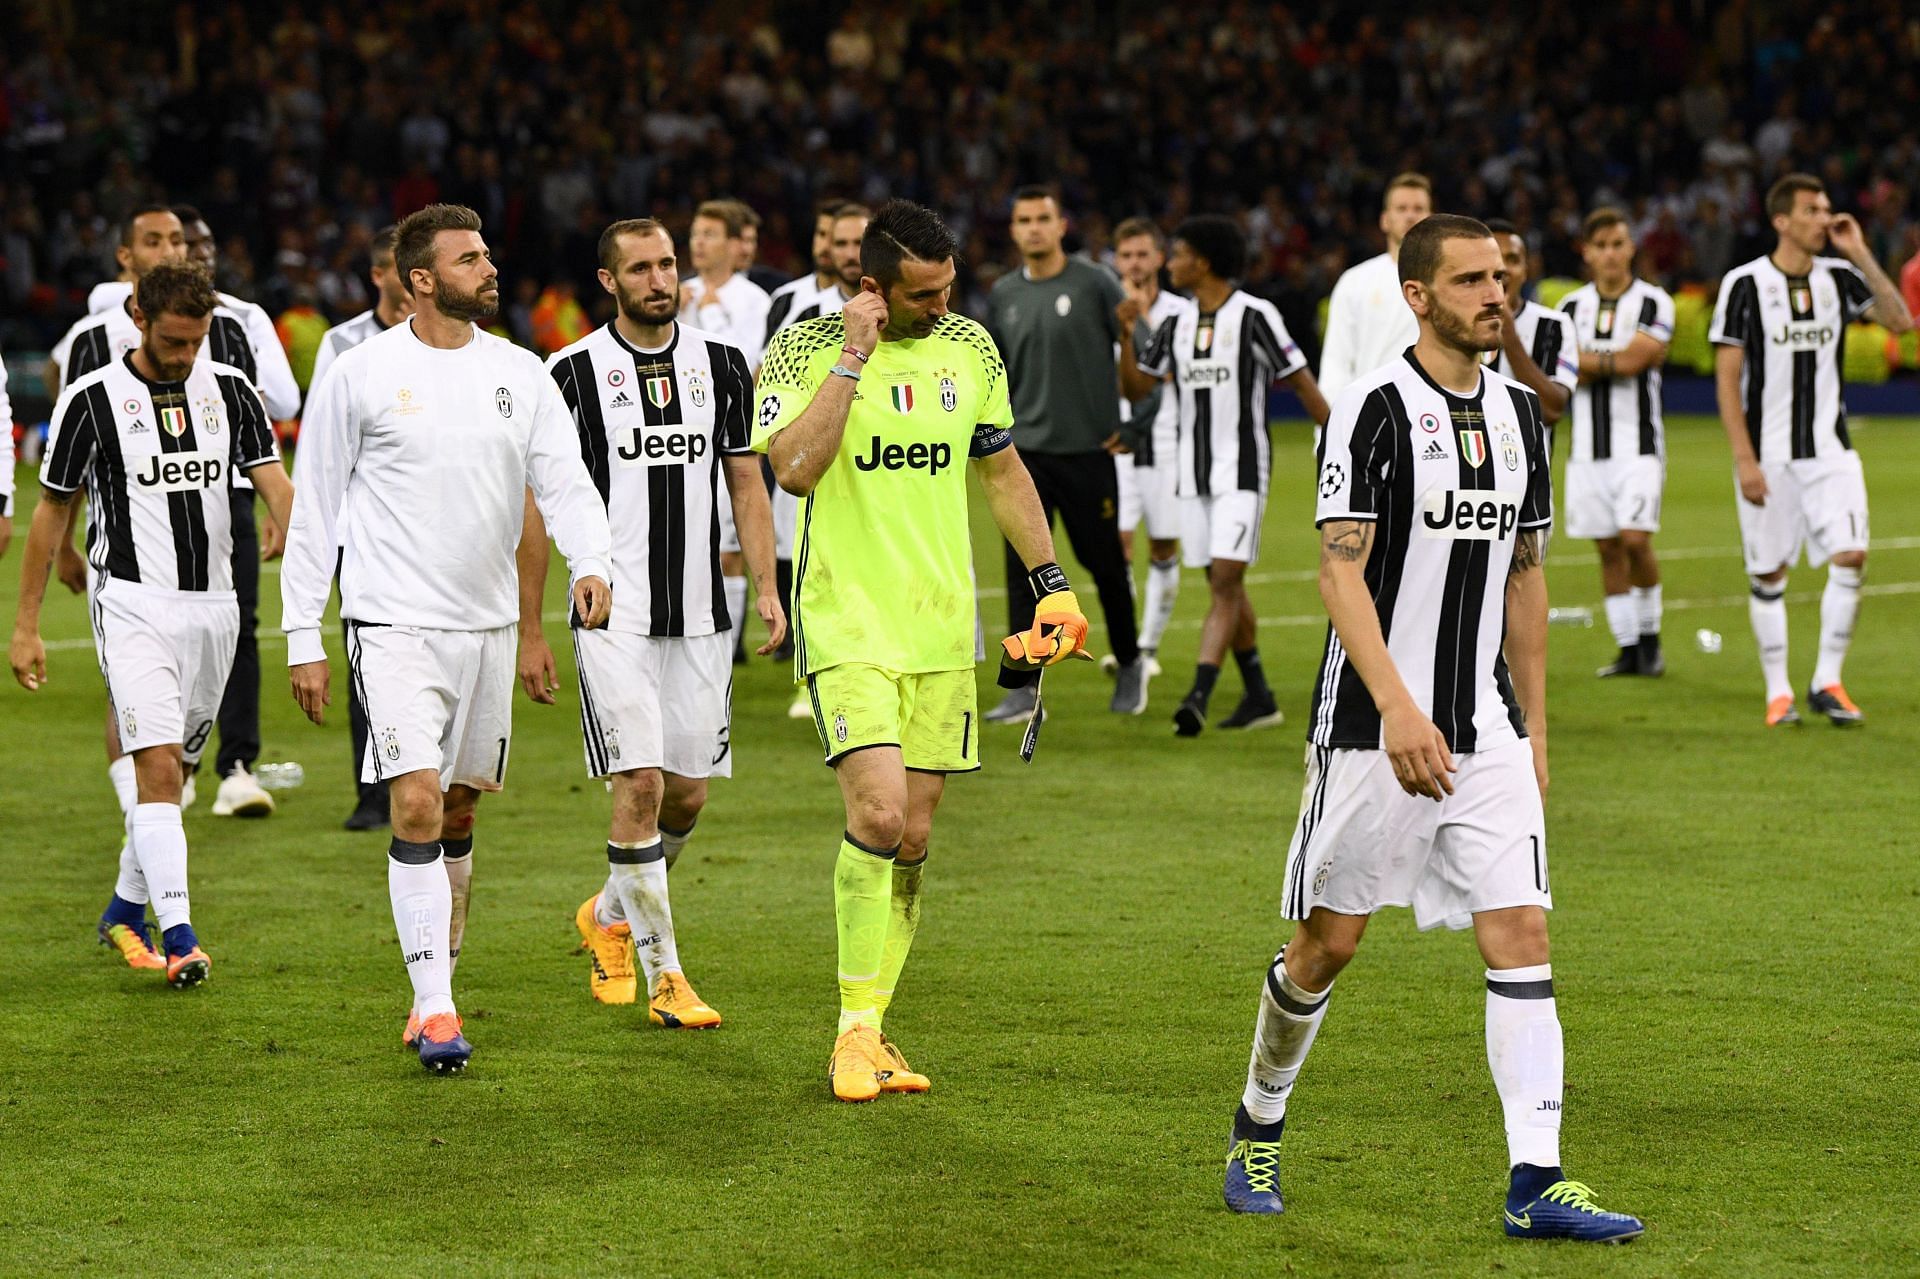 Juventus have been unlucky not to win the tournament even once this century